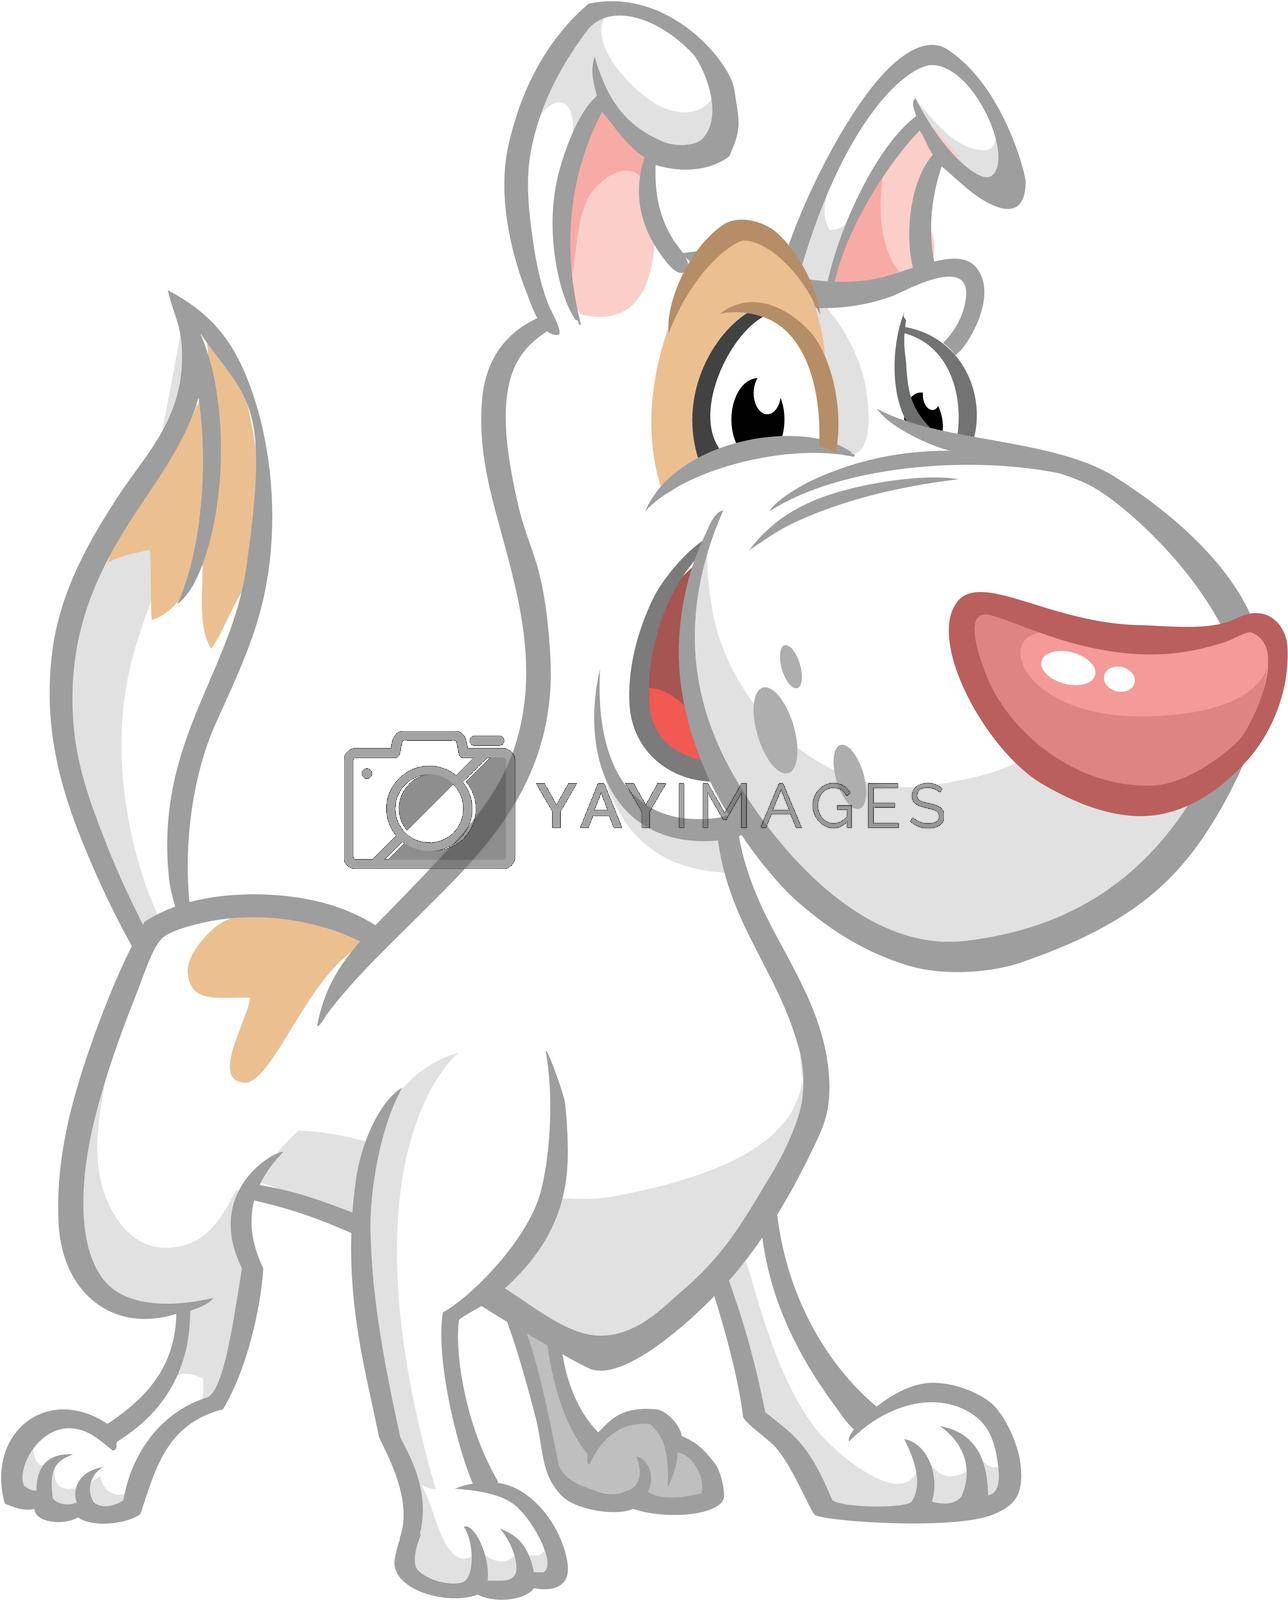 Royalty free image of Funny Jack Russel Terrier dog cartoon. Vector illustration. by drawkman